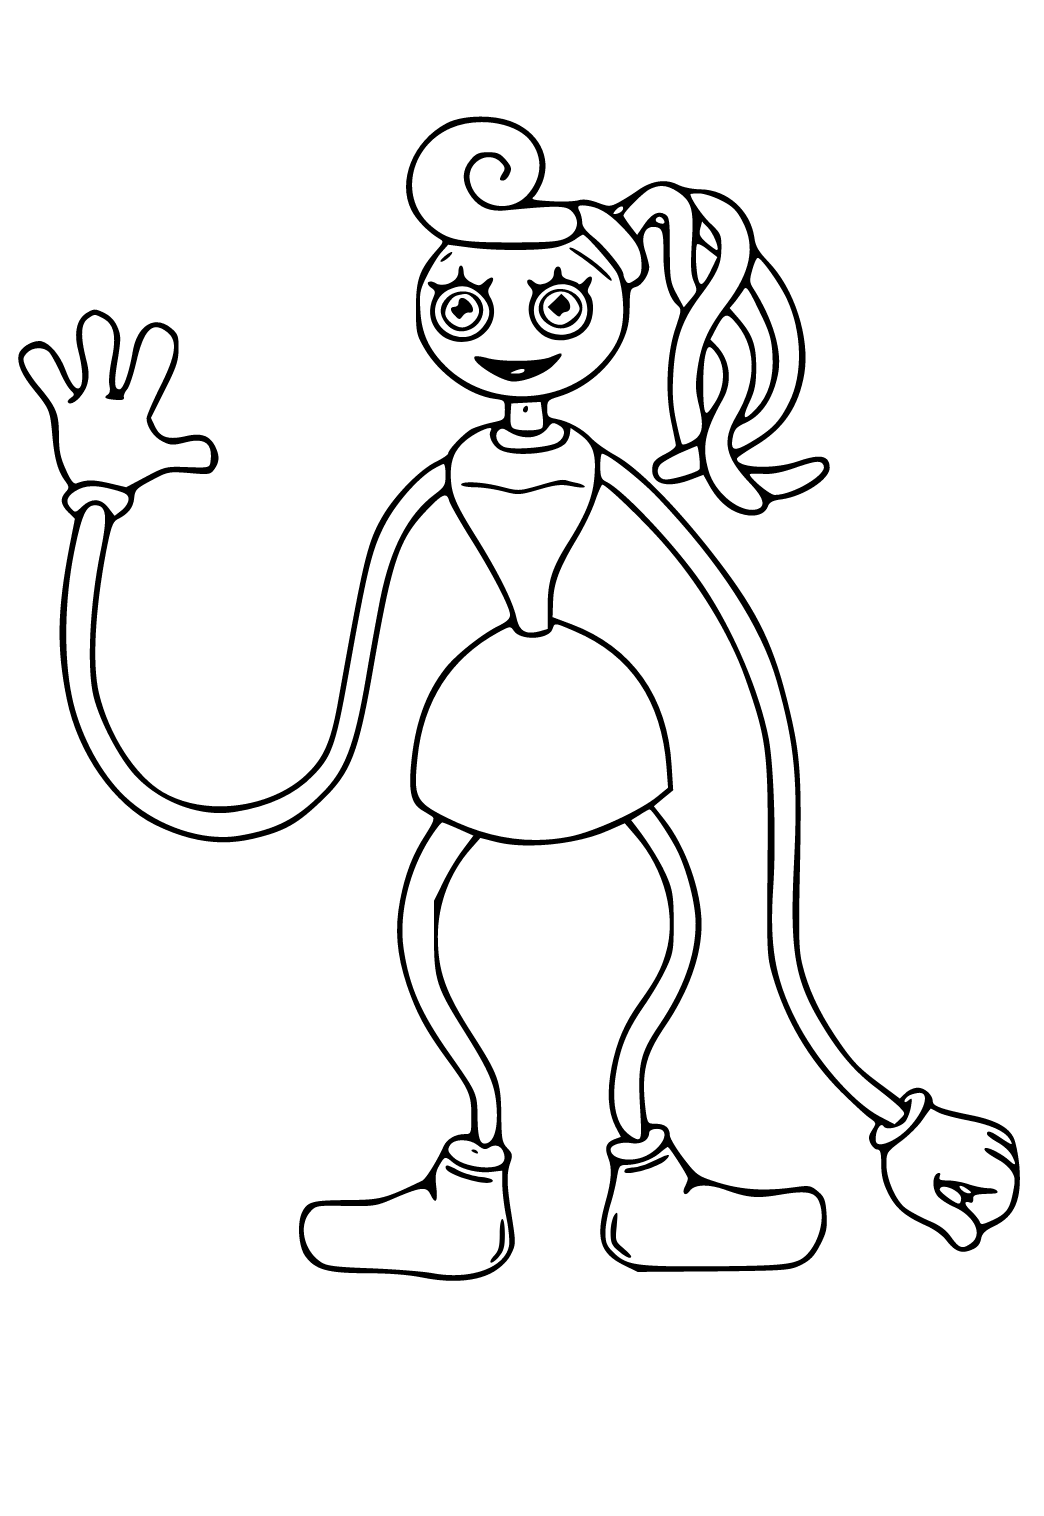 Baixar Mommy Long Legs Coloring Page para PC - LDPlayer